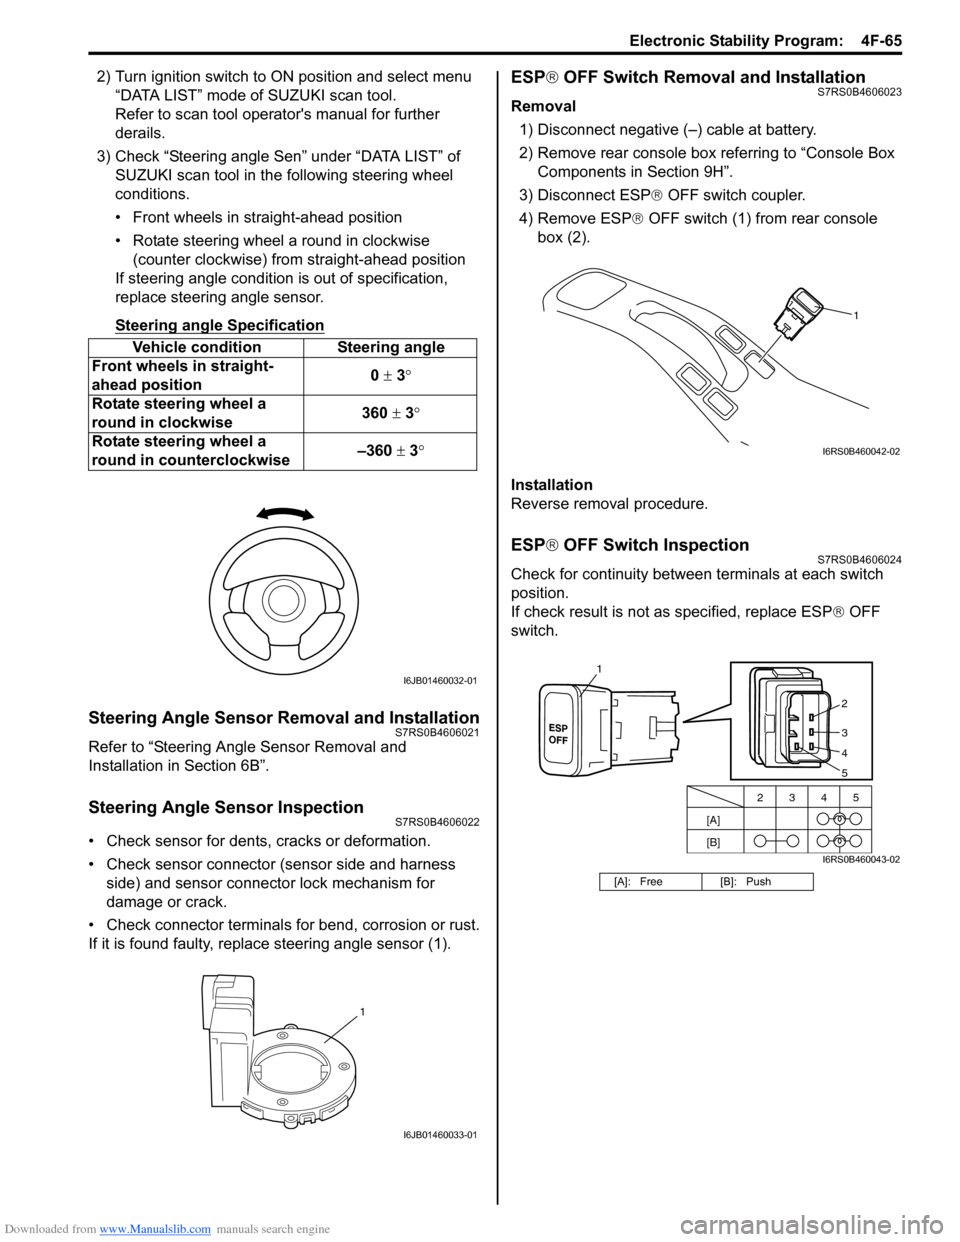 SUZUKI SWIFT 2006 2.G Service Workshop Manual Downloaded from www.Manualslib.com manuals search engine Electronic Stability Program:  4F-65
2) Turn ignition switch to ON position and select menu 
“DATA LIST” mode of SUZUKI scan tool.
Refer to